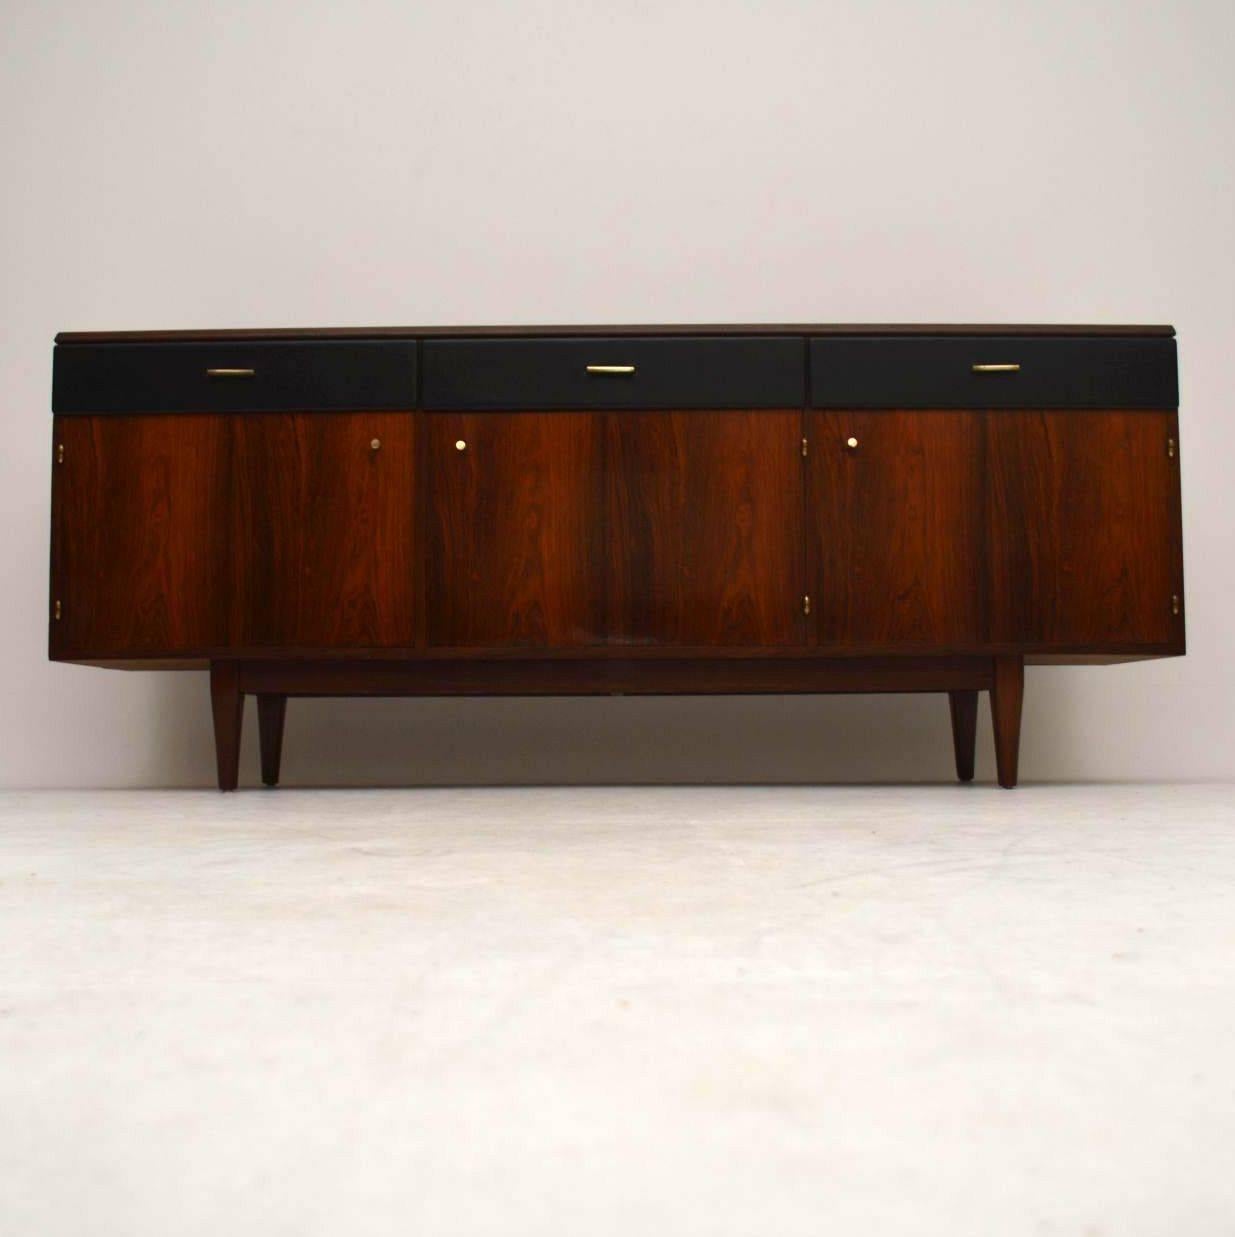 A magnificent rosewood sideboard from the 1960s, this was made by Beresford & Hicks, who were furniture makers by appointment to H.M the Queen. The quality is amazing, it has beautiful rosewood veneers on the inside and out, all built on solid wood,